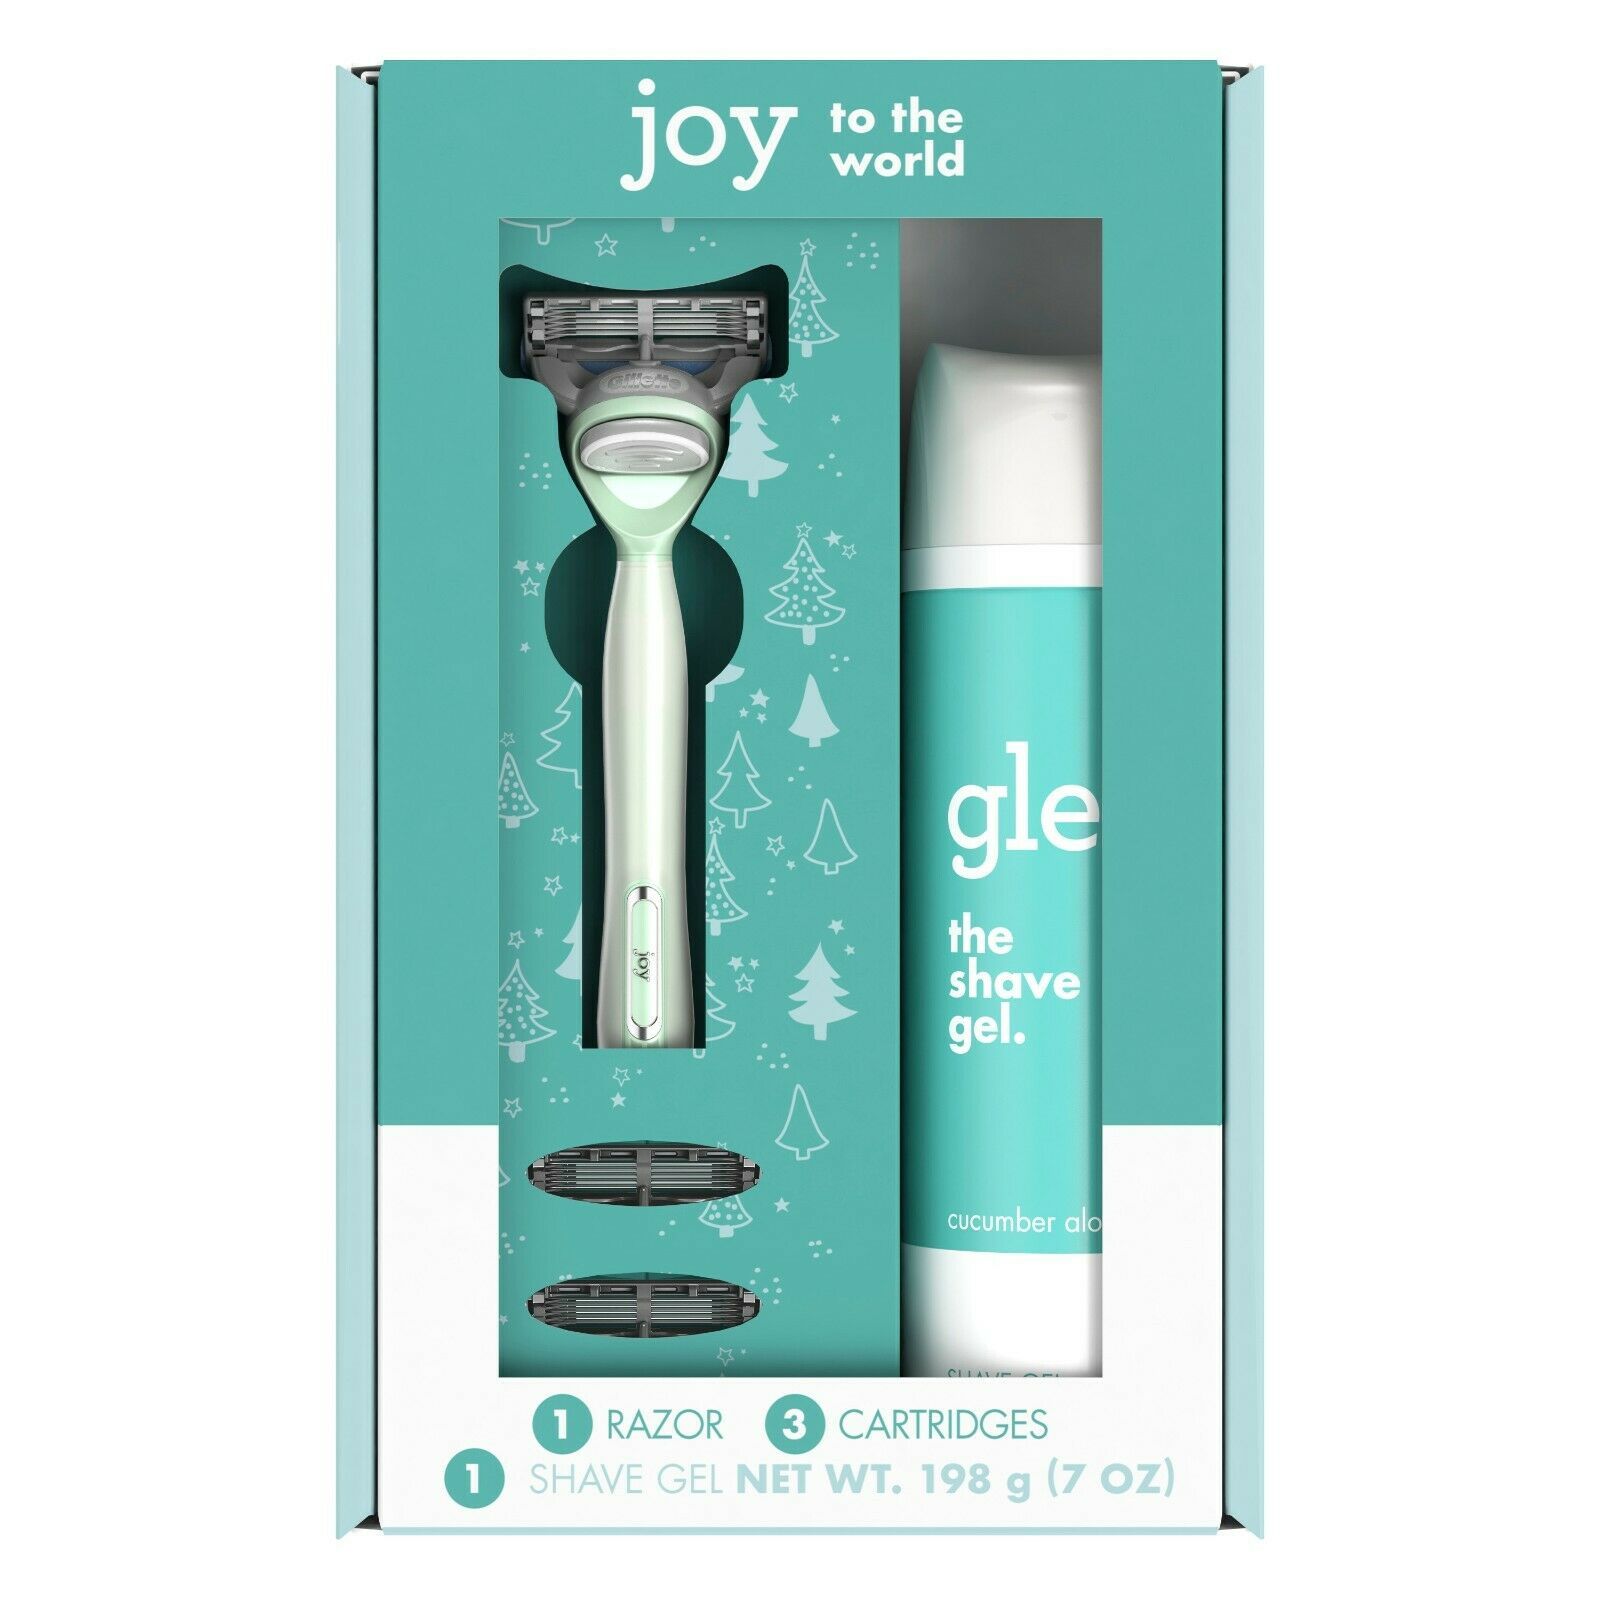 joy Teal Holiday Gift Set including 1 Handle, 3 Refills and a Shave Gel.. - $25.73